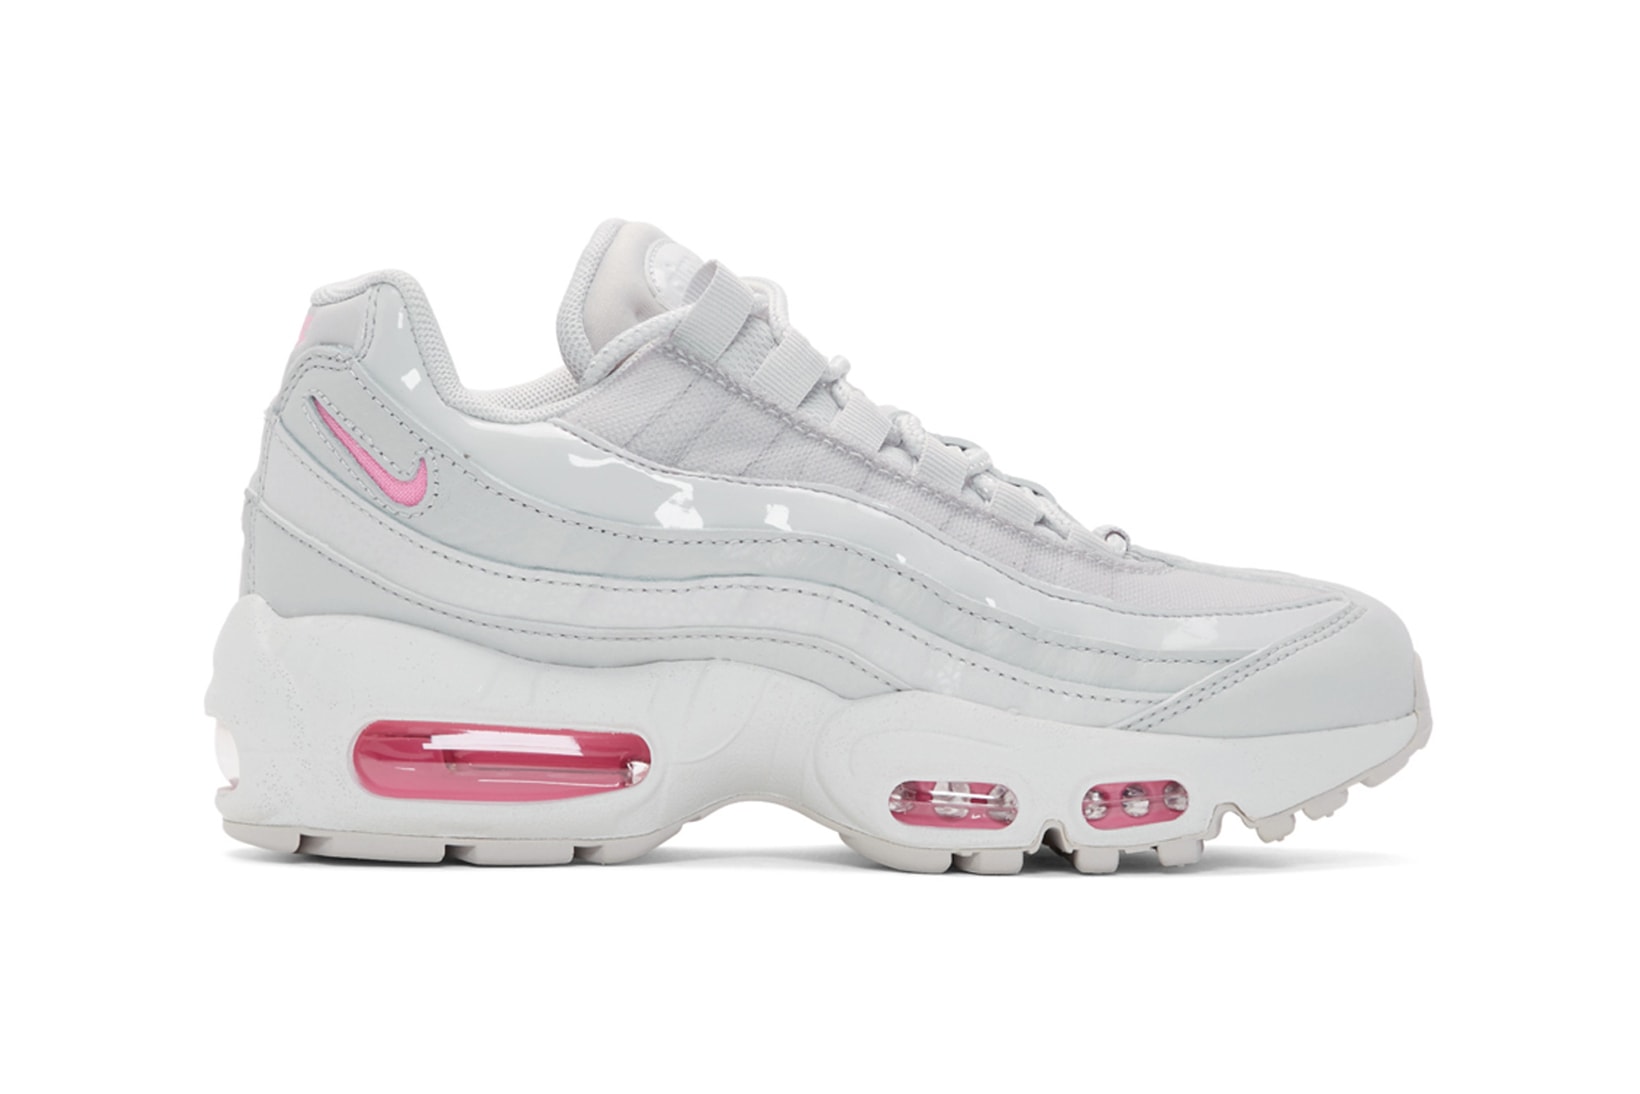 Nike Air Max 95 Vast Grey Psychic Pink Patent Matte Sneakers Trainers 